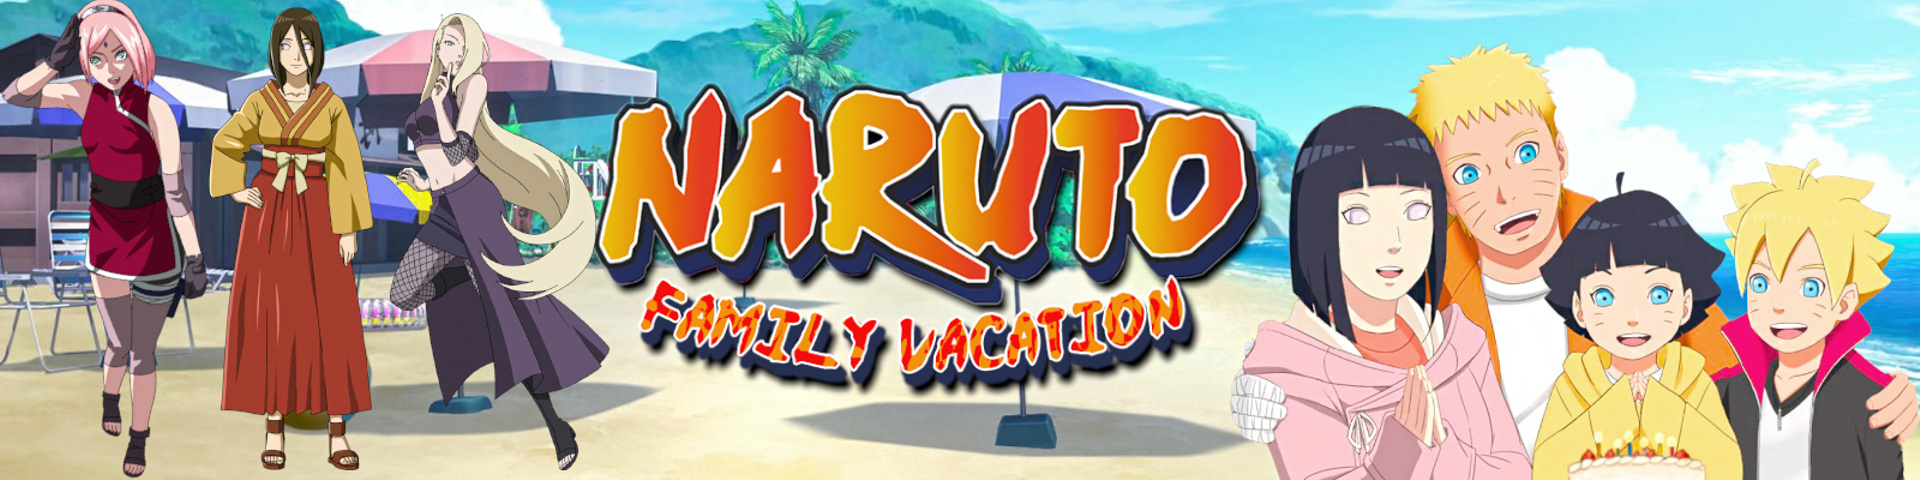 Maison Williams - Naruto: Family Vacation - Version 1.0 fix Completed